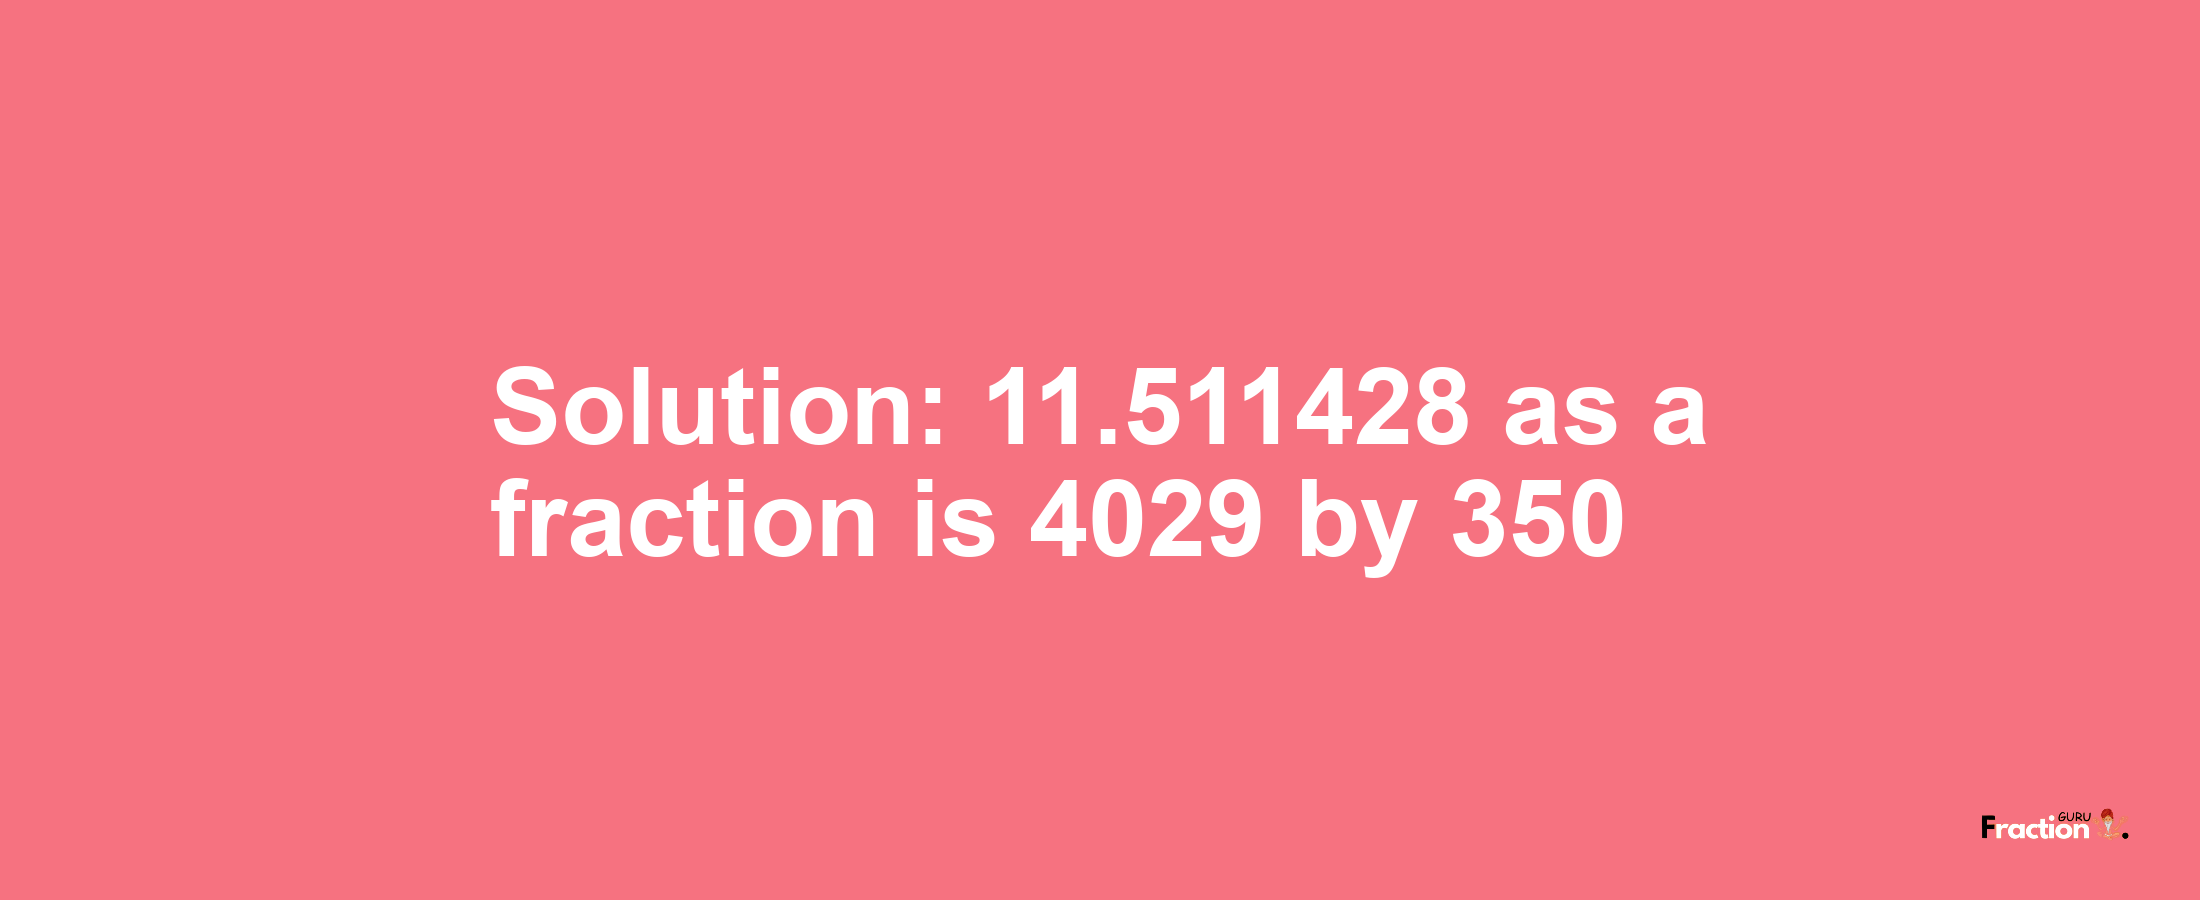 Solution:11.511428 as a fraction is 4029/350